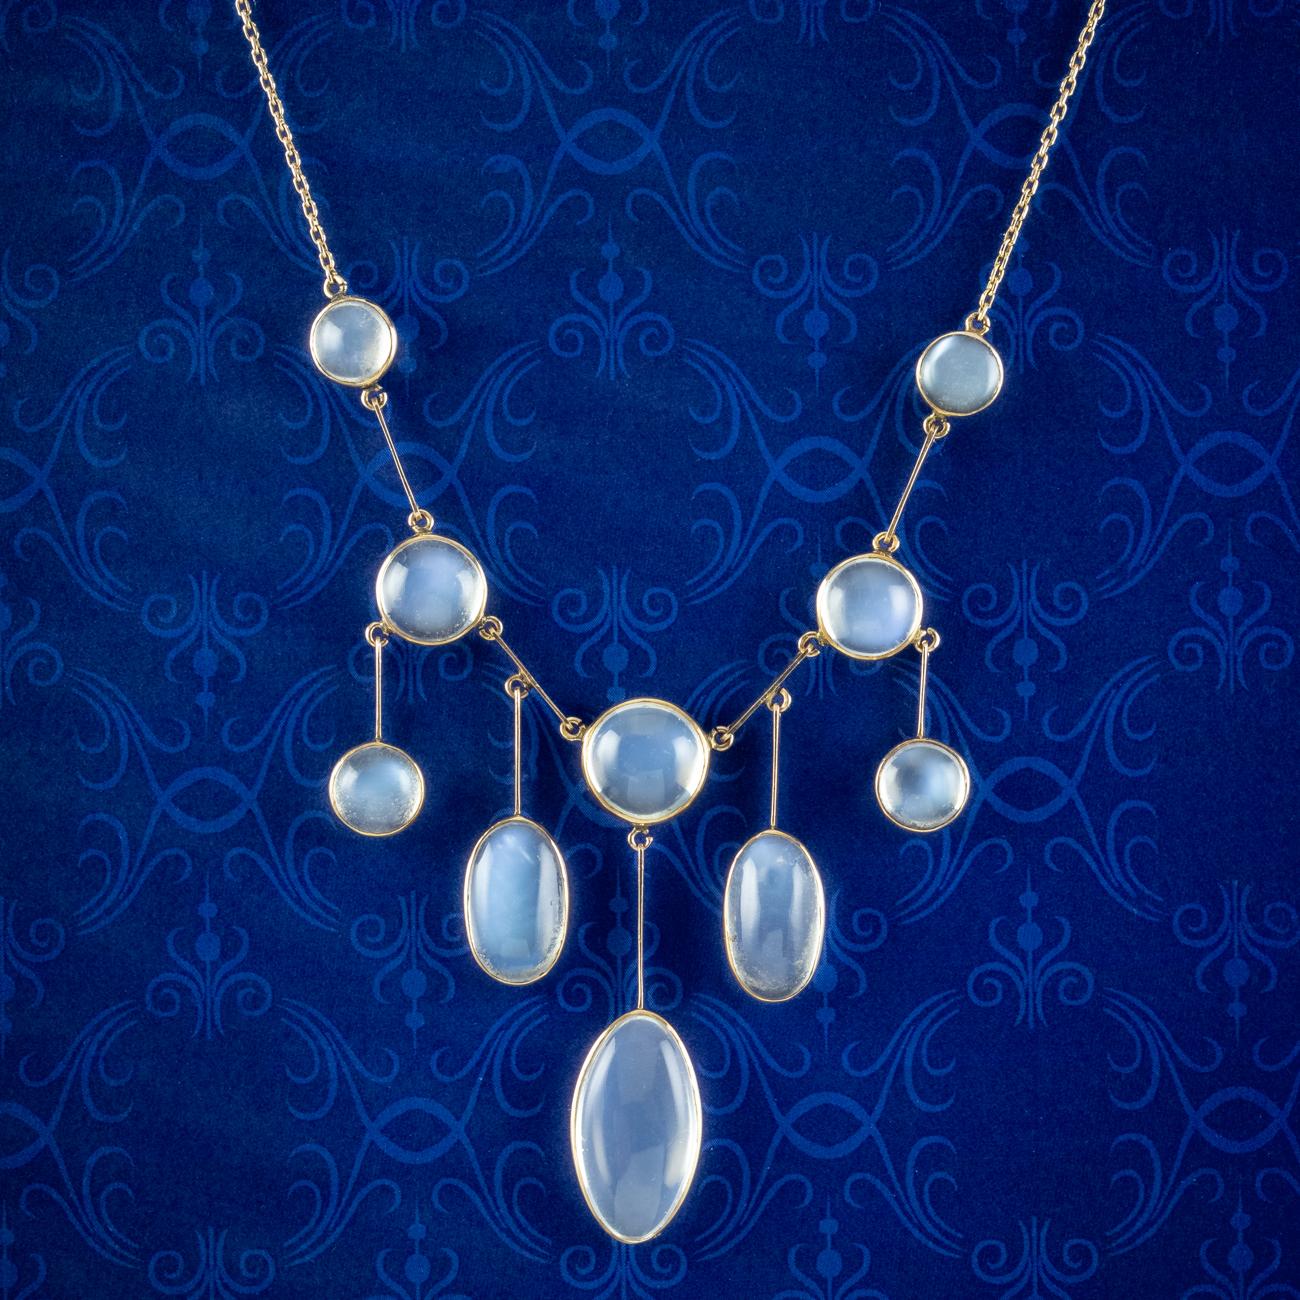 An enchanting antique Victorian necklace adorned with ten mesmerising cabochon moonstones with a ghostly blue schiller. They range from 1 to 8ct and are bezel set along five graduating droppers at the bottom.

The mystifying moonstone derives its